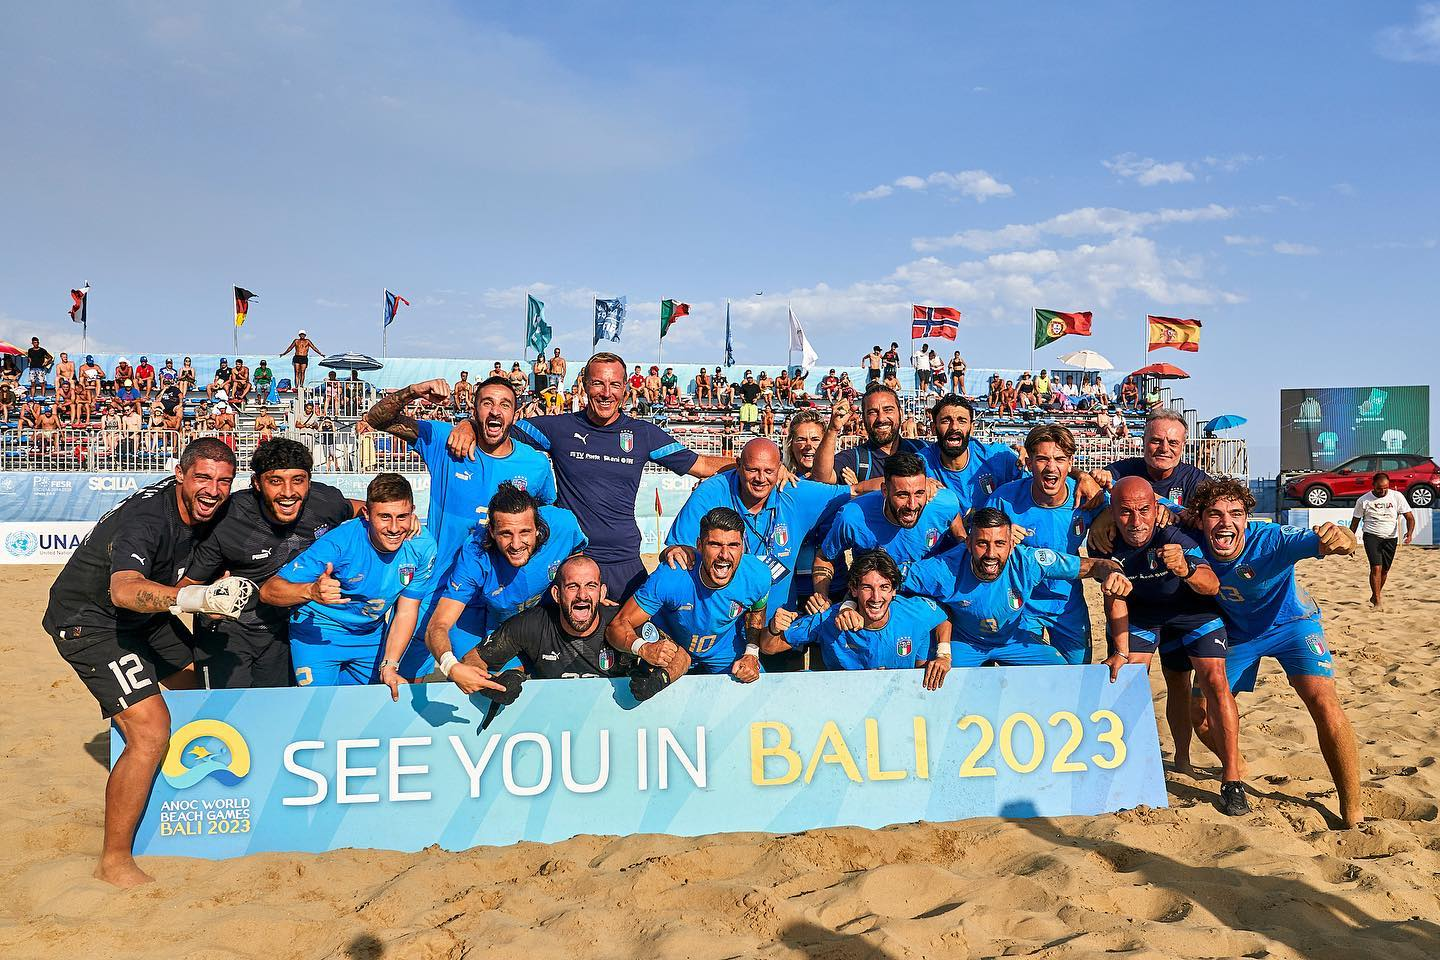 The decision to cancel the ANOC World Beach Games came only a month before the event was due to start in Bali ©ANOC